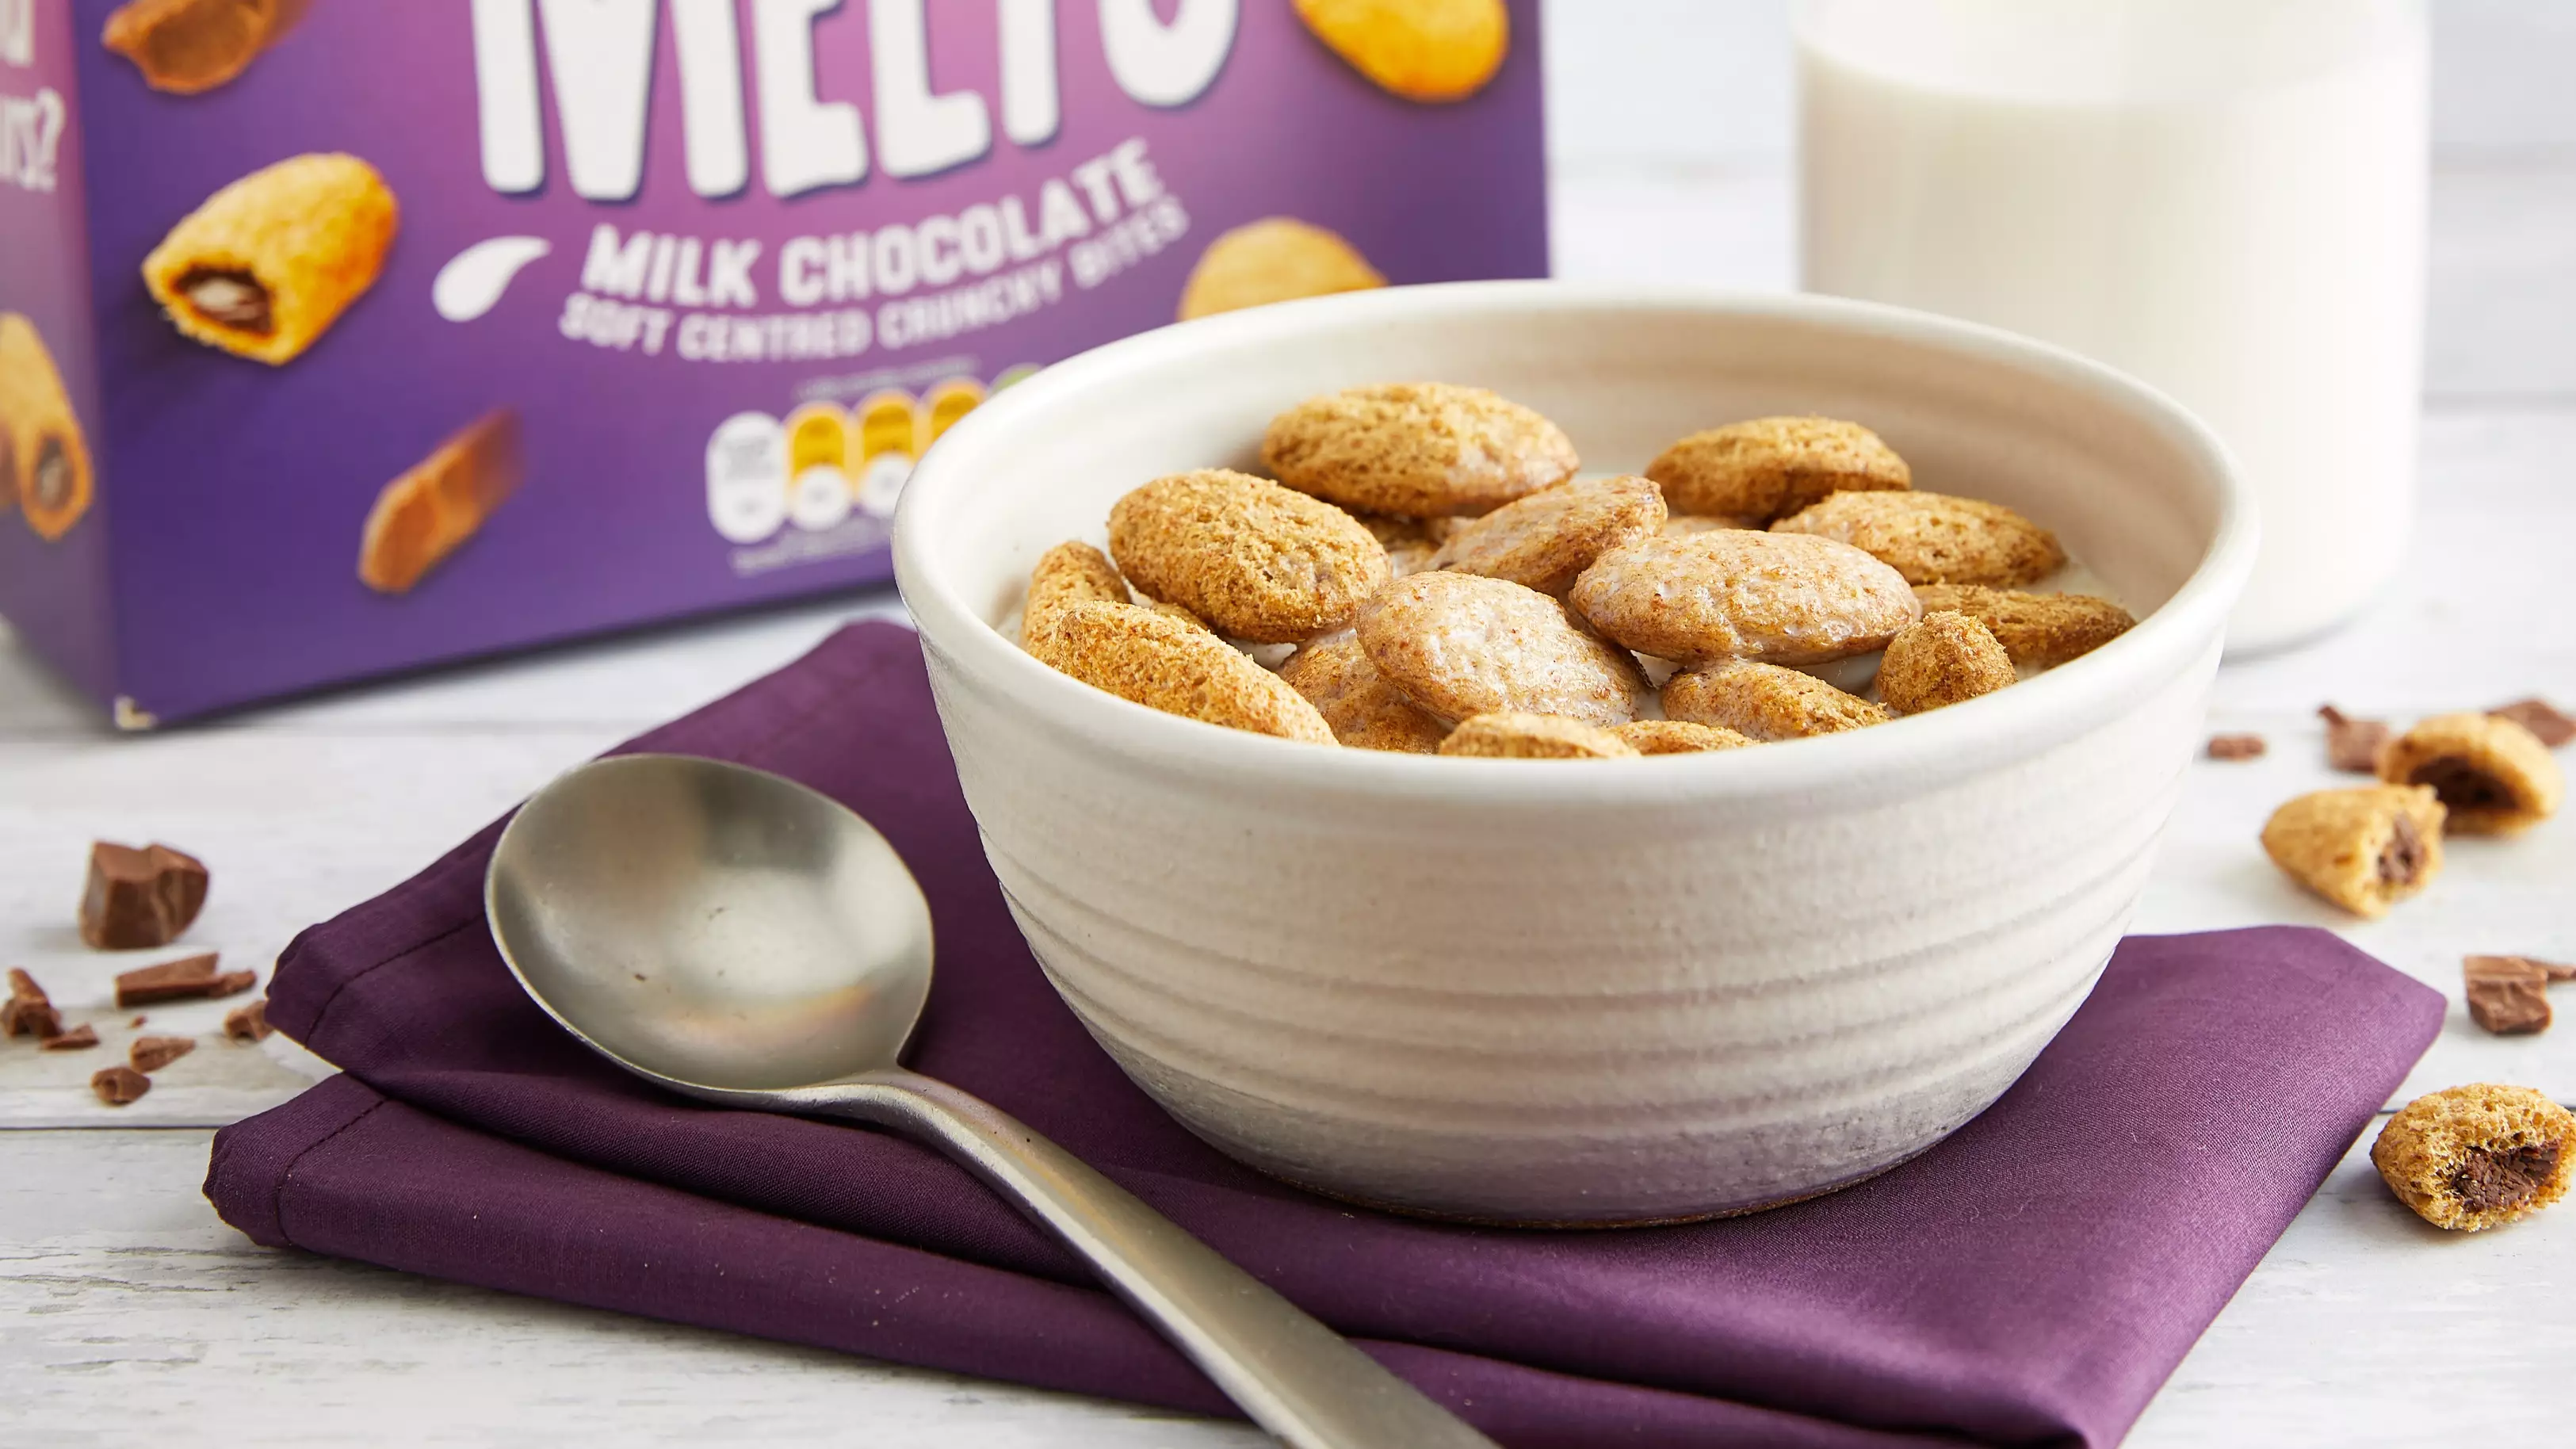 Weetabix Launches Chocolate-Filled 'Melt' Cereal